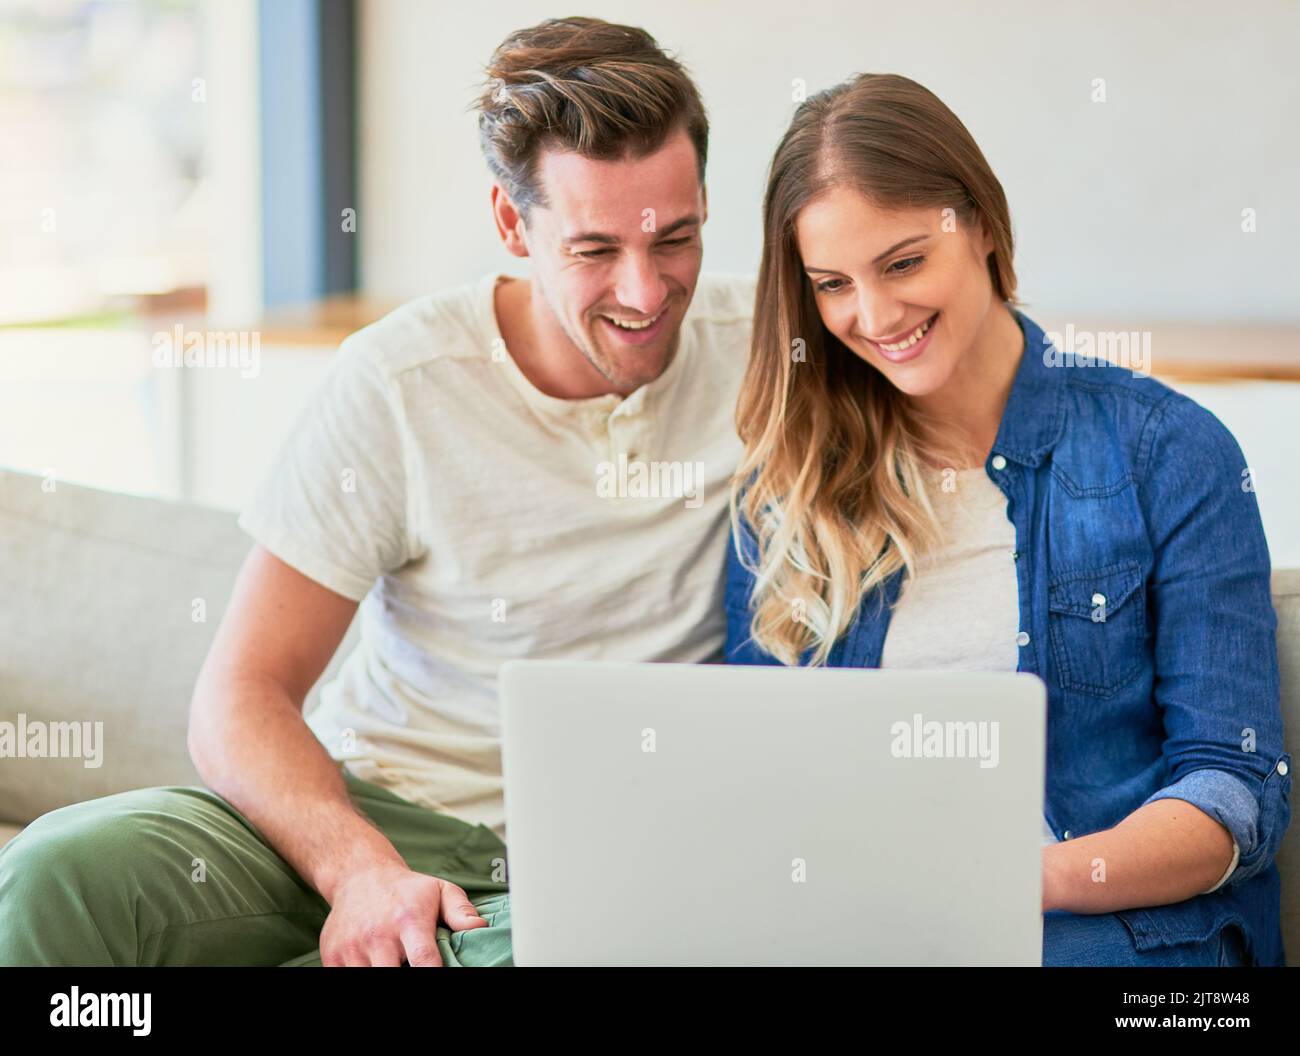 Blogging with her boyfriend. an affectionate young couple using their laptop while sitting on the sofa at home. Stock Photo